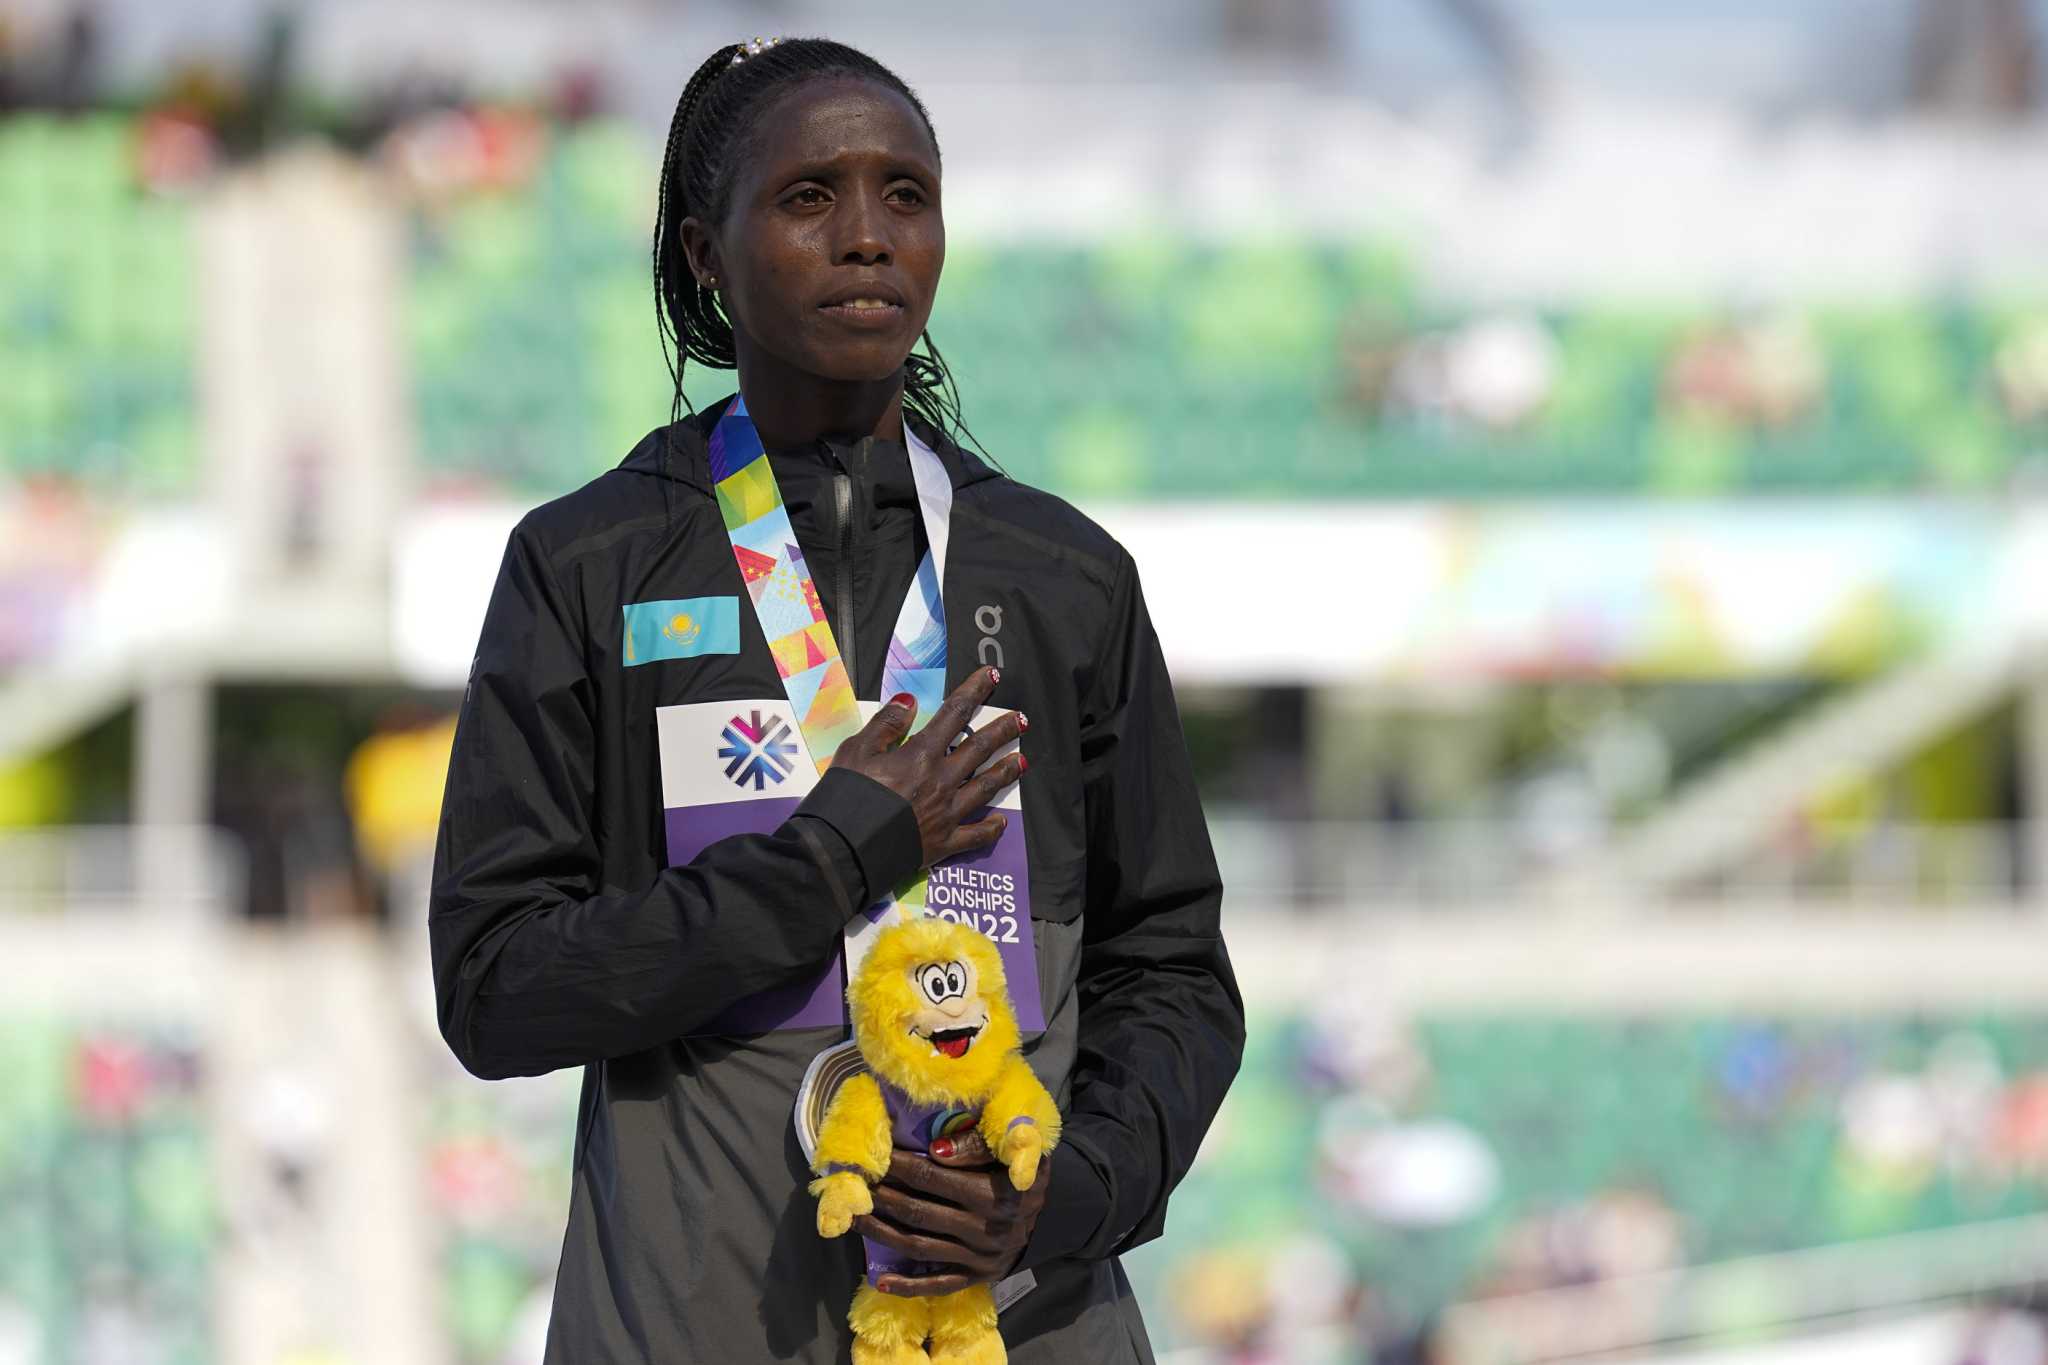 World champion runner Norah Jeruto on course for Paris Olympics after ...